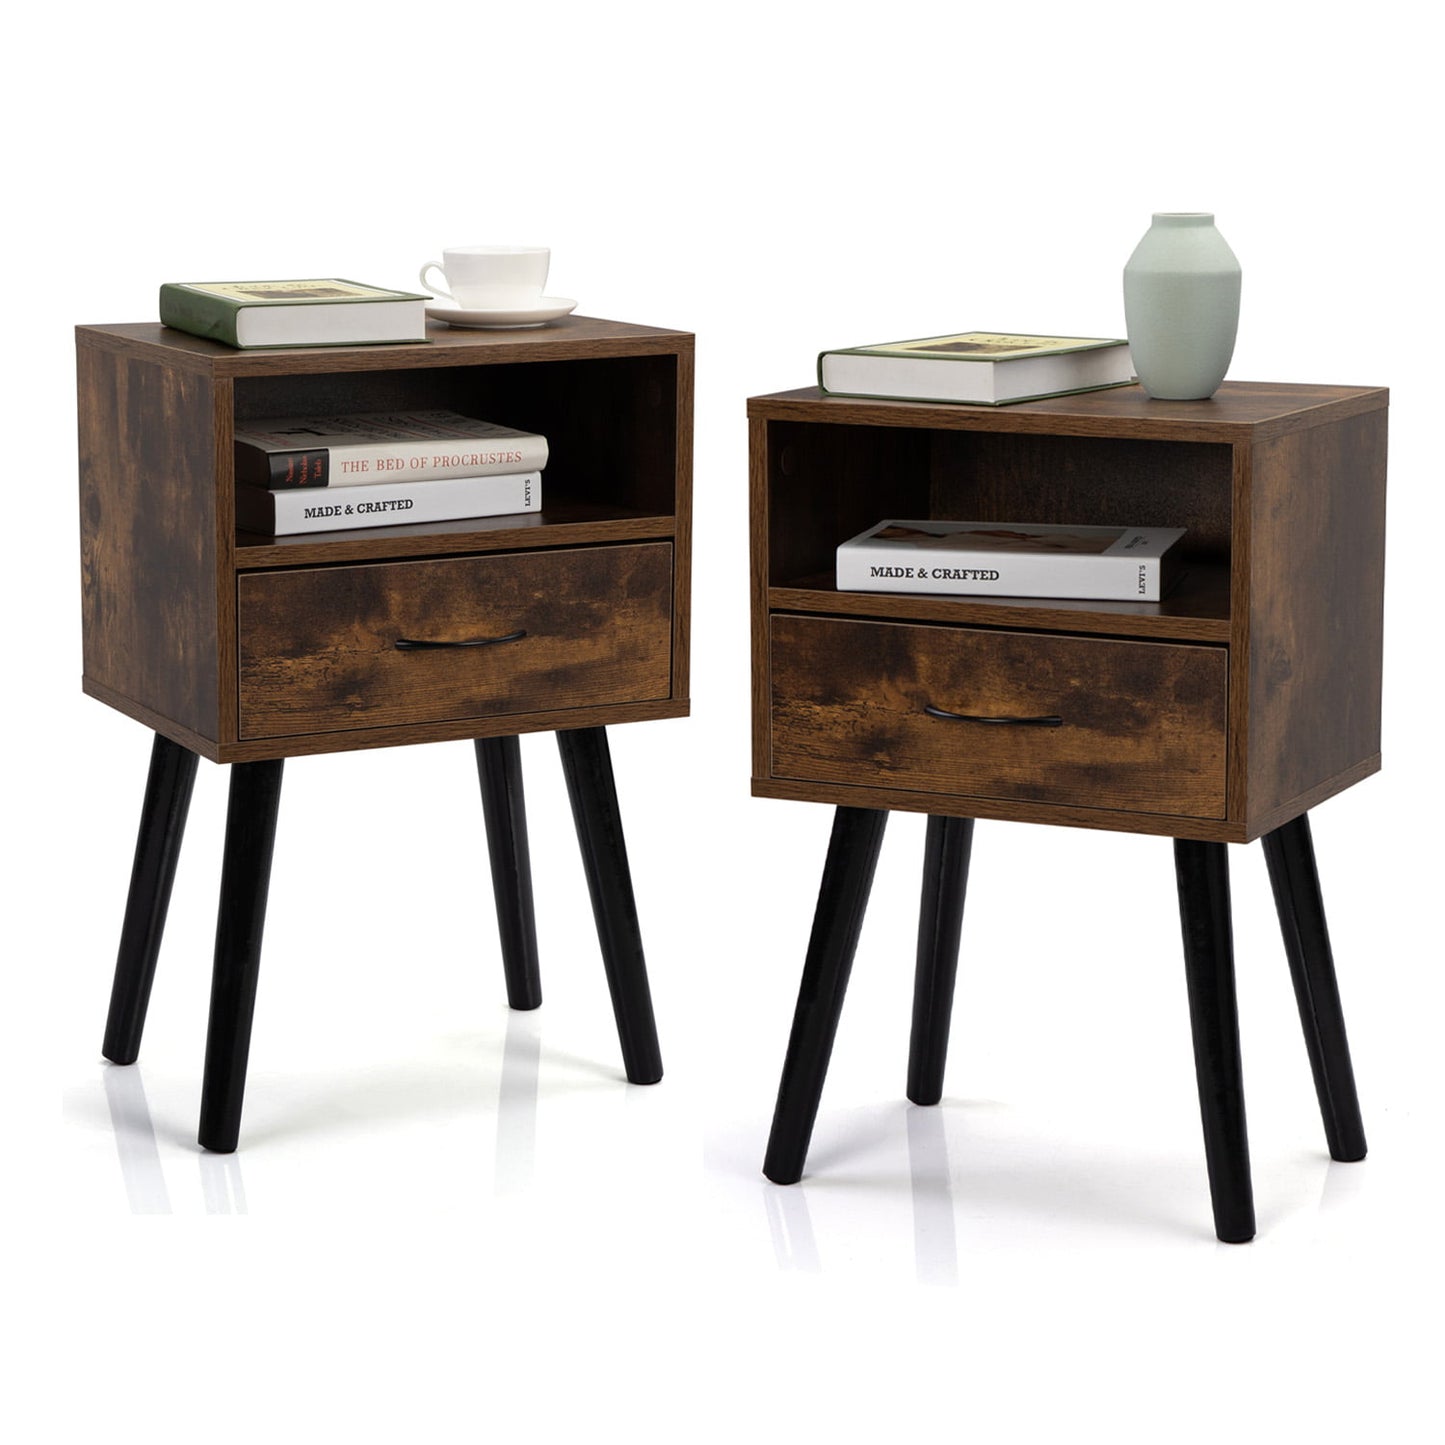 SYNGAR Farmhouse Night Stand End Table Set of 2, Modern Bed Side Table Nightstand with Drawers, Bedside Table for Bedroom